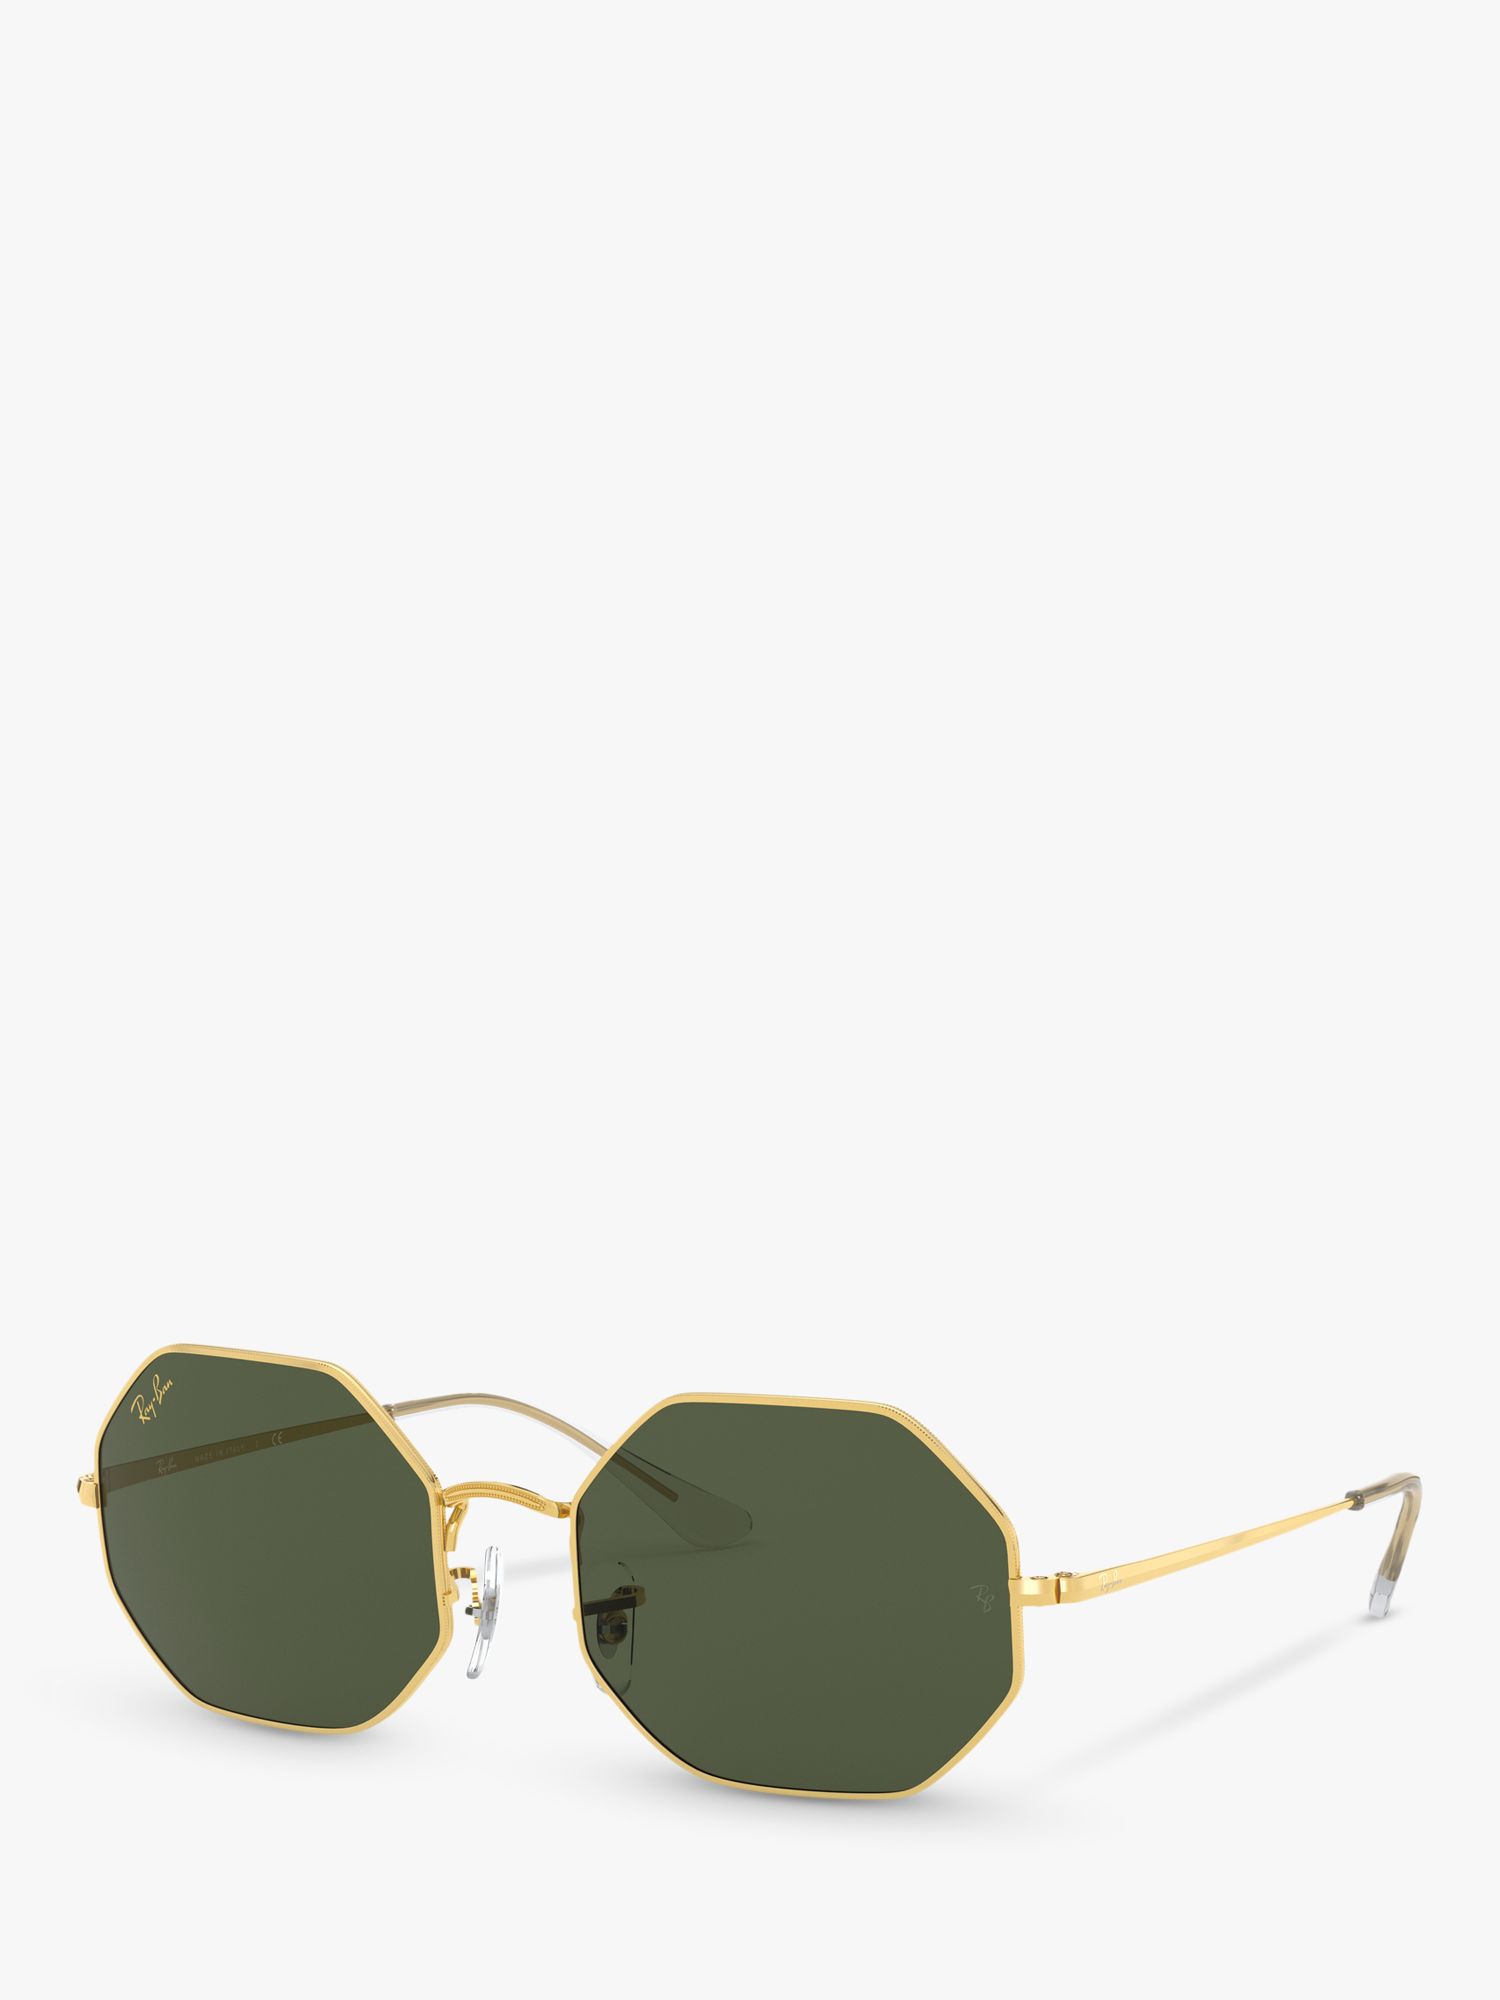 Ray-Ban RB1972 Unisex Octagonal Sunglasses, Gold/Green at John Lewis &  Partners